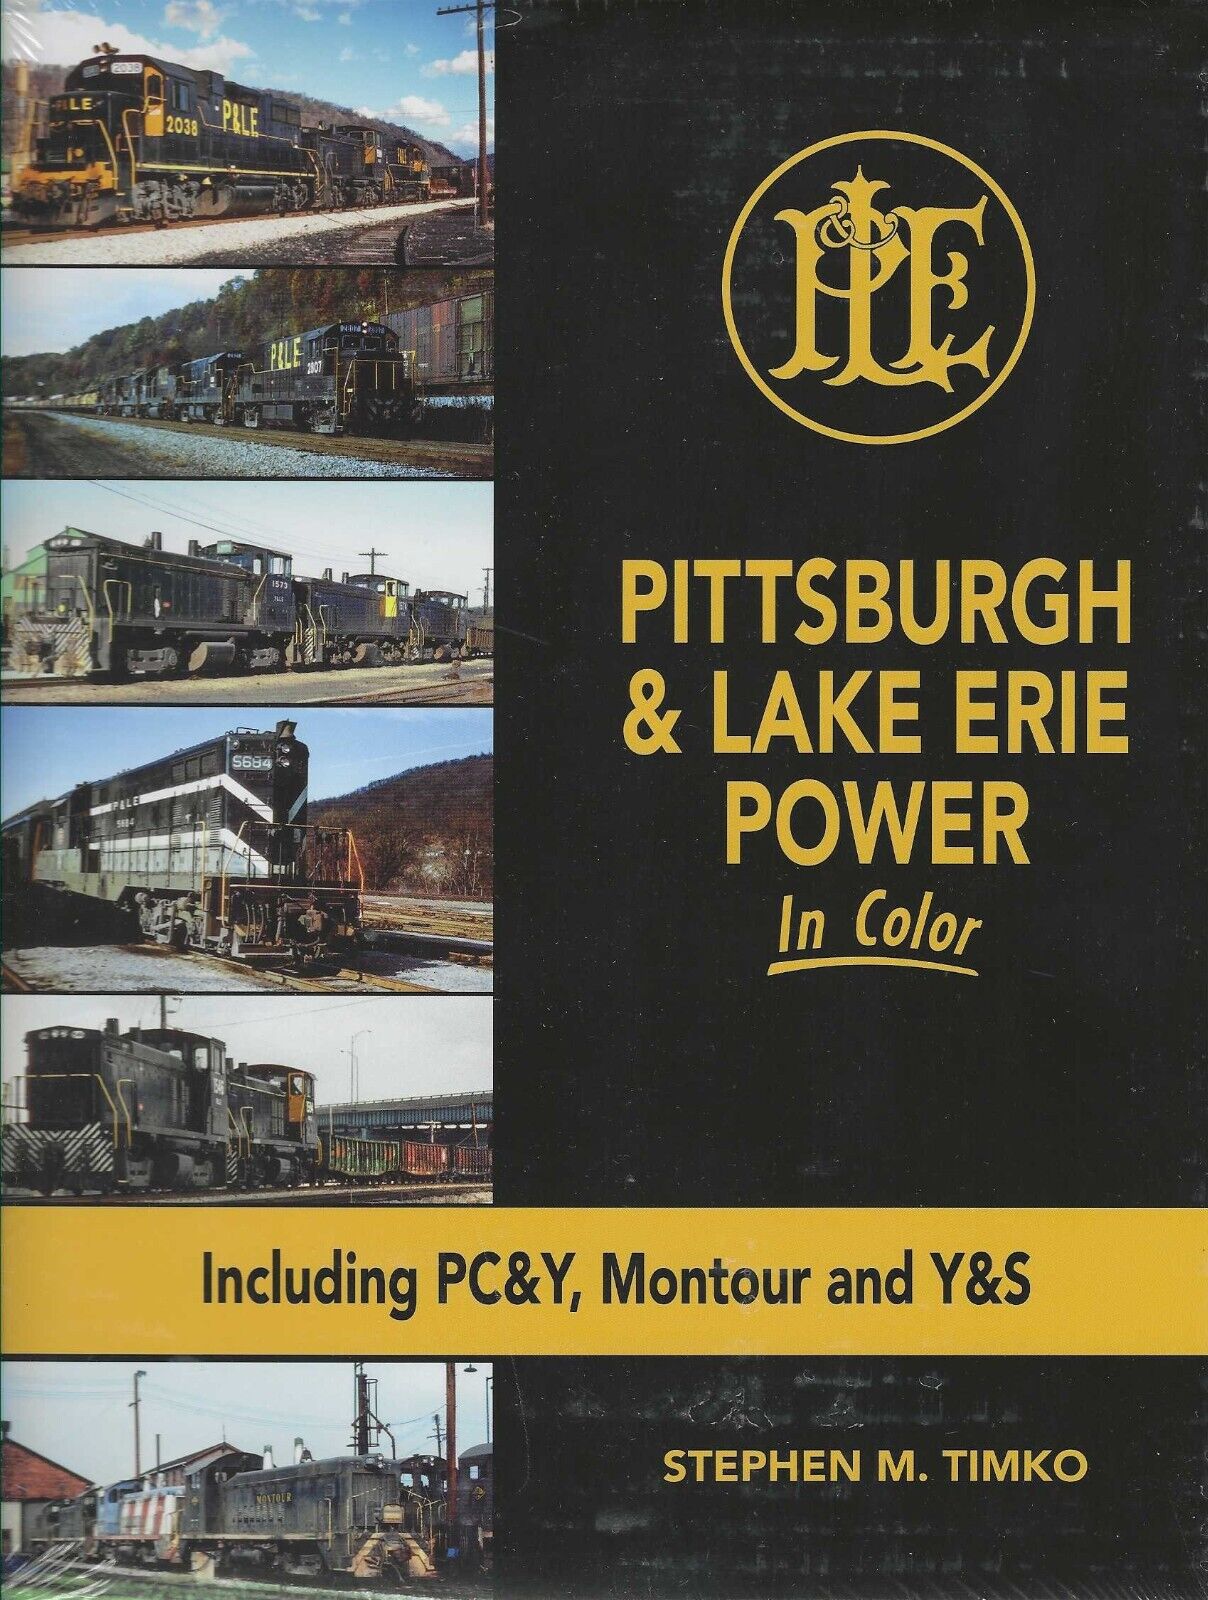 PITTSBURGH & LAKE ERIE Power in Color includes PC&Y, Montour, Y&S - (BRAND NEW)